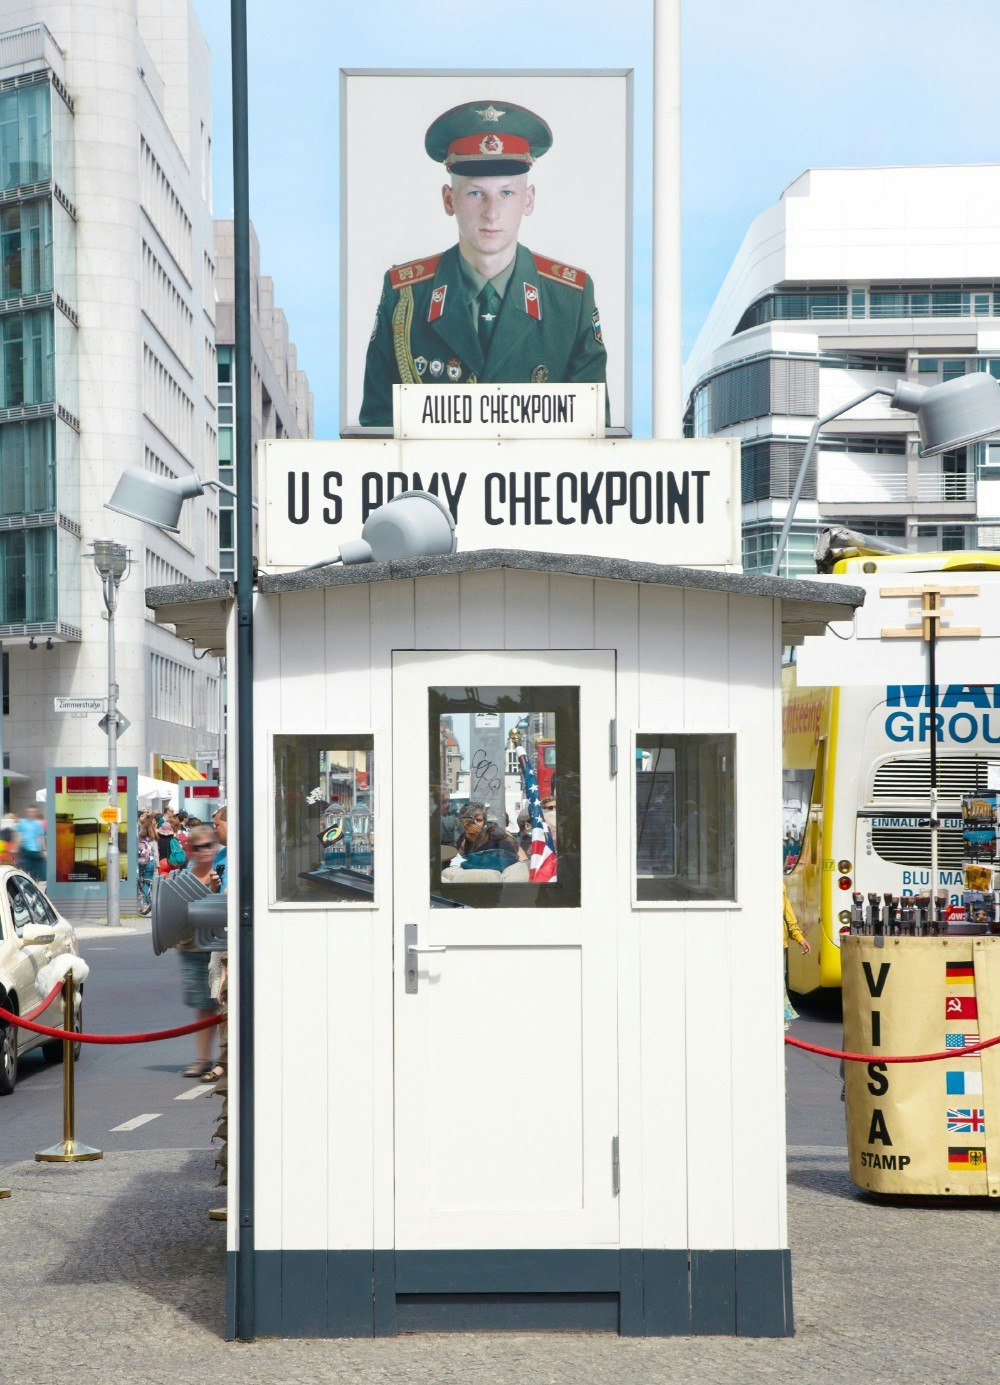 Checkpoint Charlie in Berlin was the crossing point between East and West Berlin sectors during the Cold War